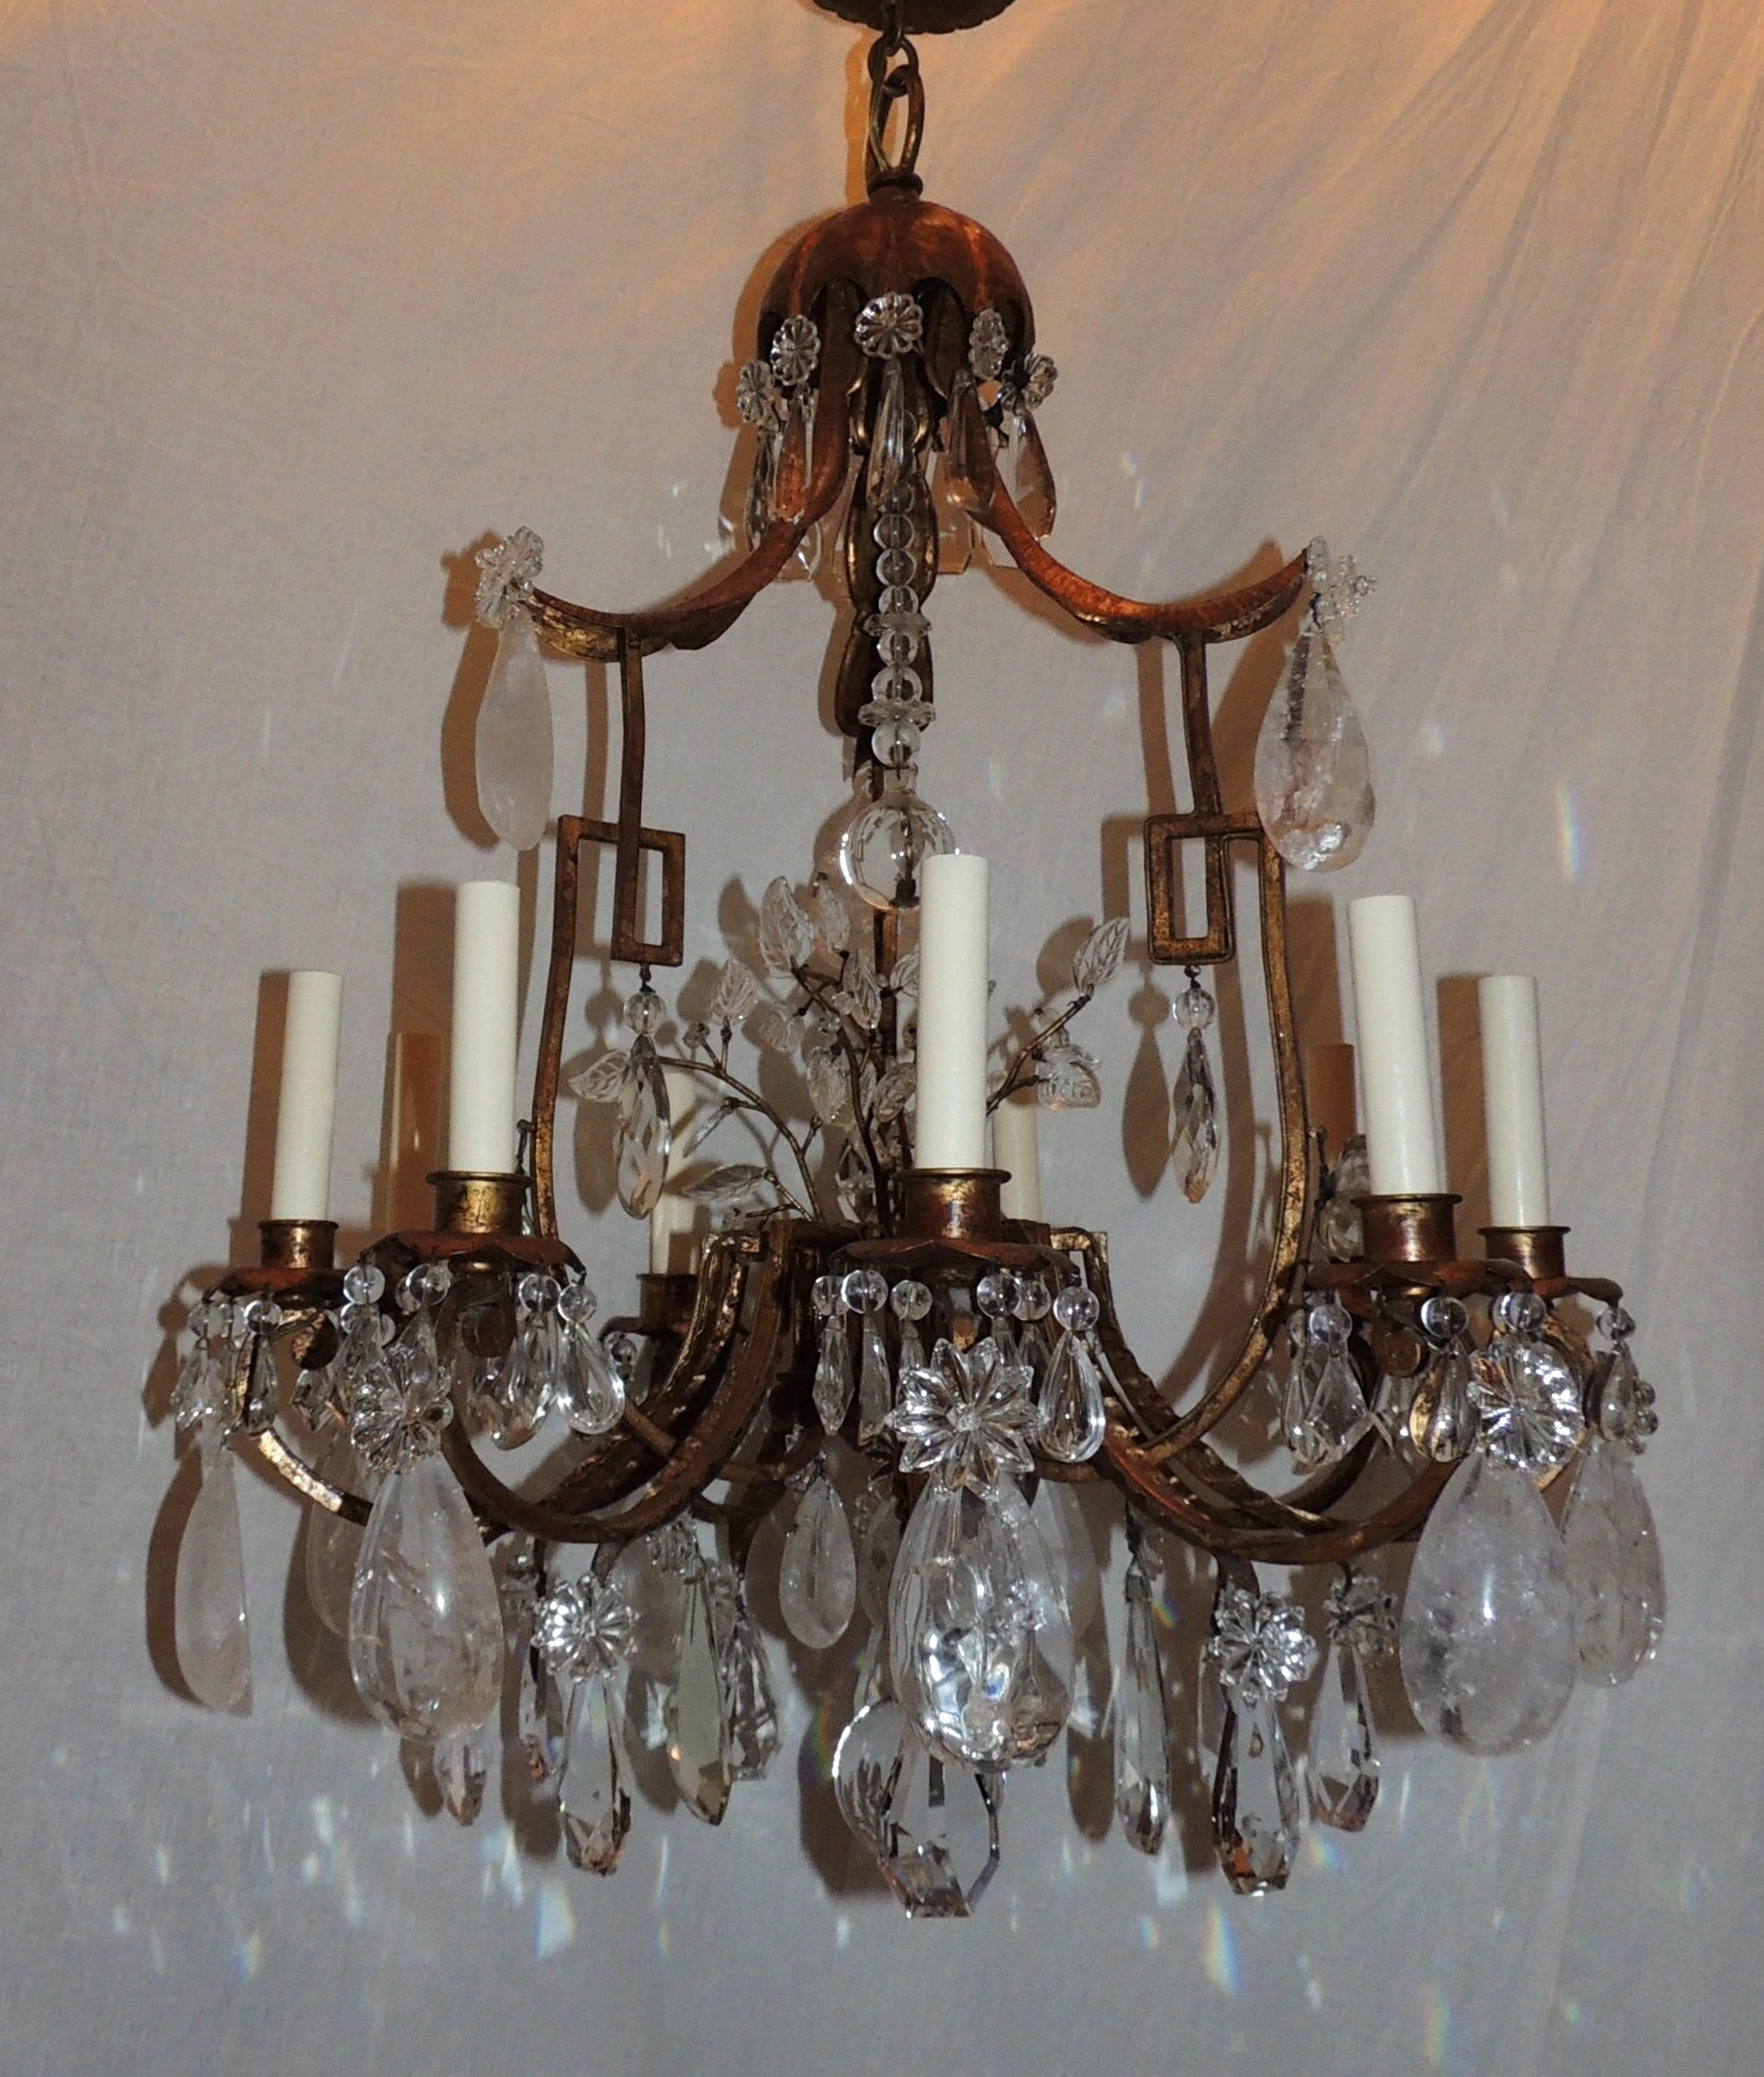 This is a fabulous and large pagoda form chandelier that has a beautiful center with crystal flowers topped with crystal beads and crystal ball. Each of the nine scrolled arms have a wonderful mix of faceted and rock crystal. The chandelier is